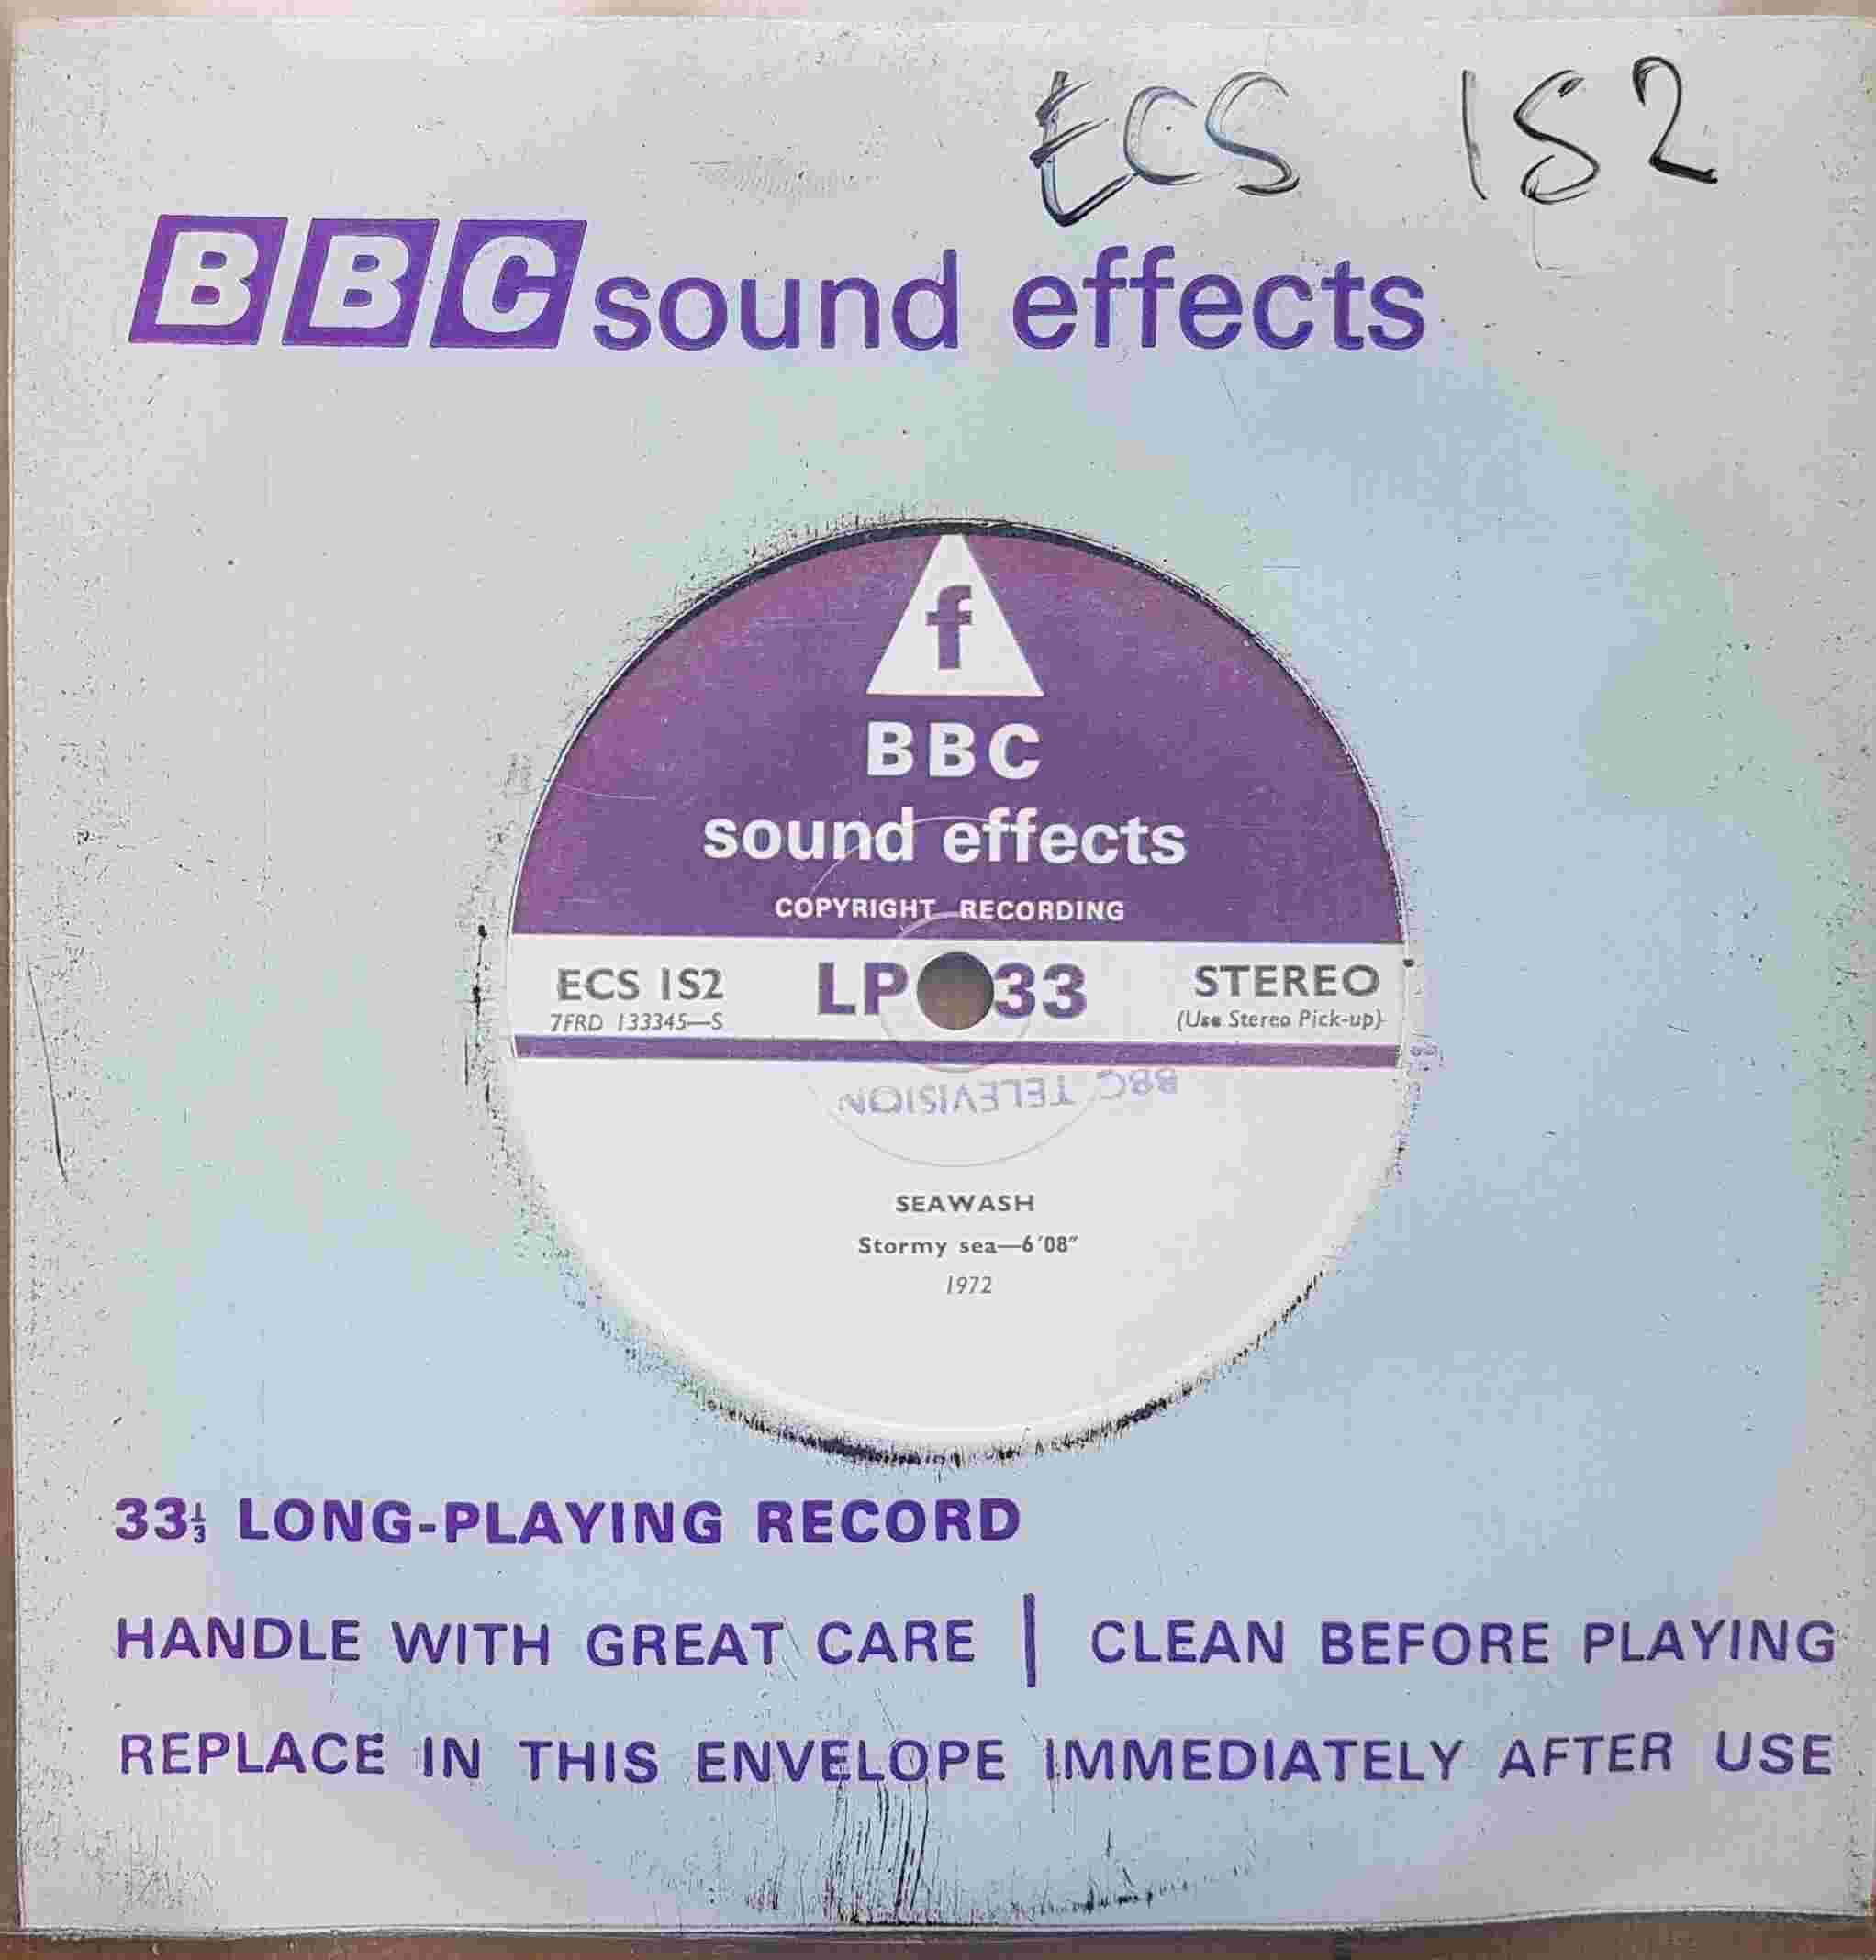 Picture of ECS 1S2 Seawash by artist Not registered from the BBC singles - Records and Tapes library